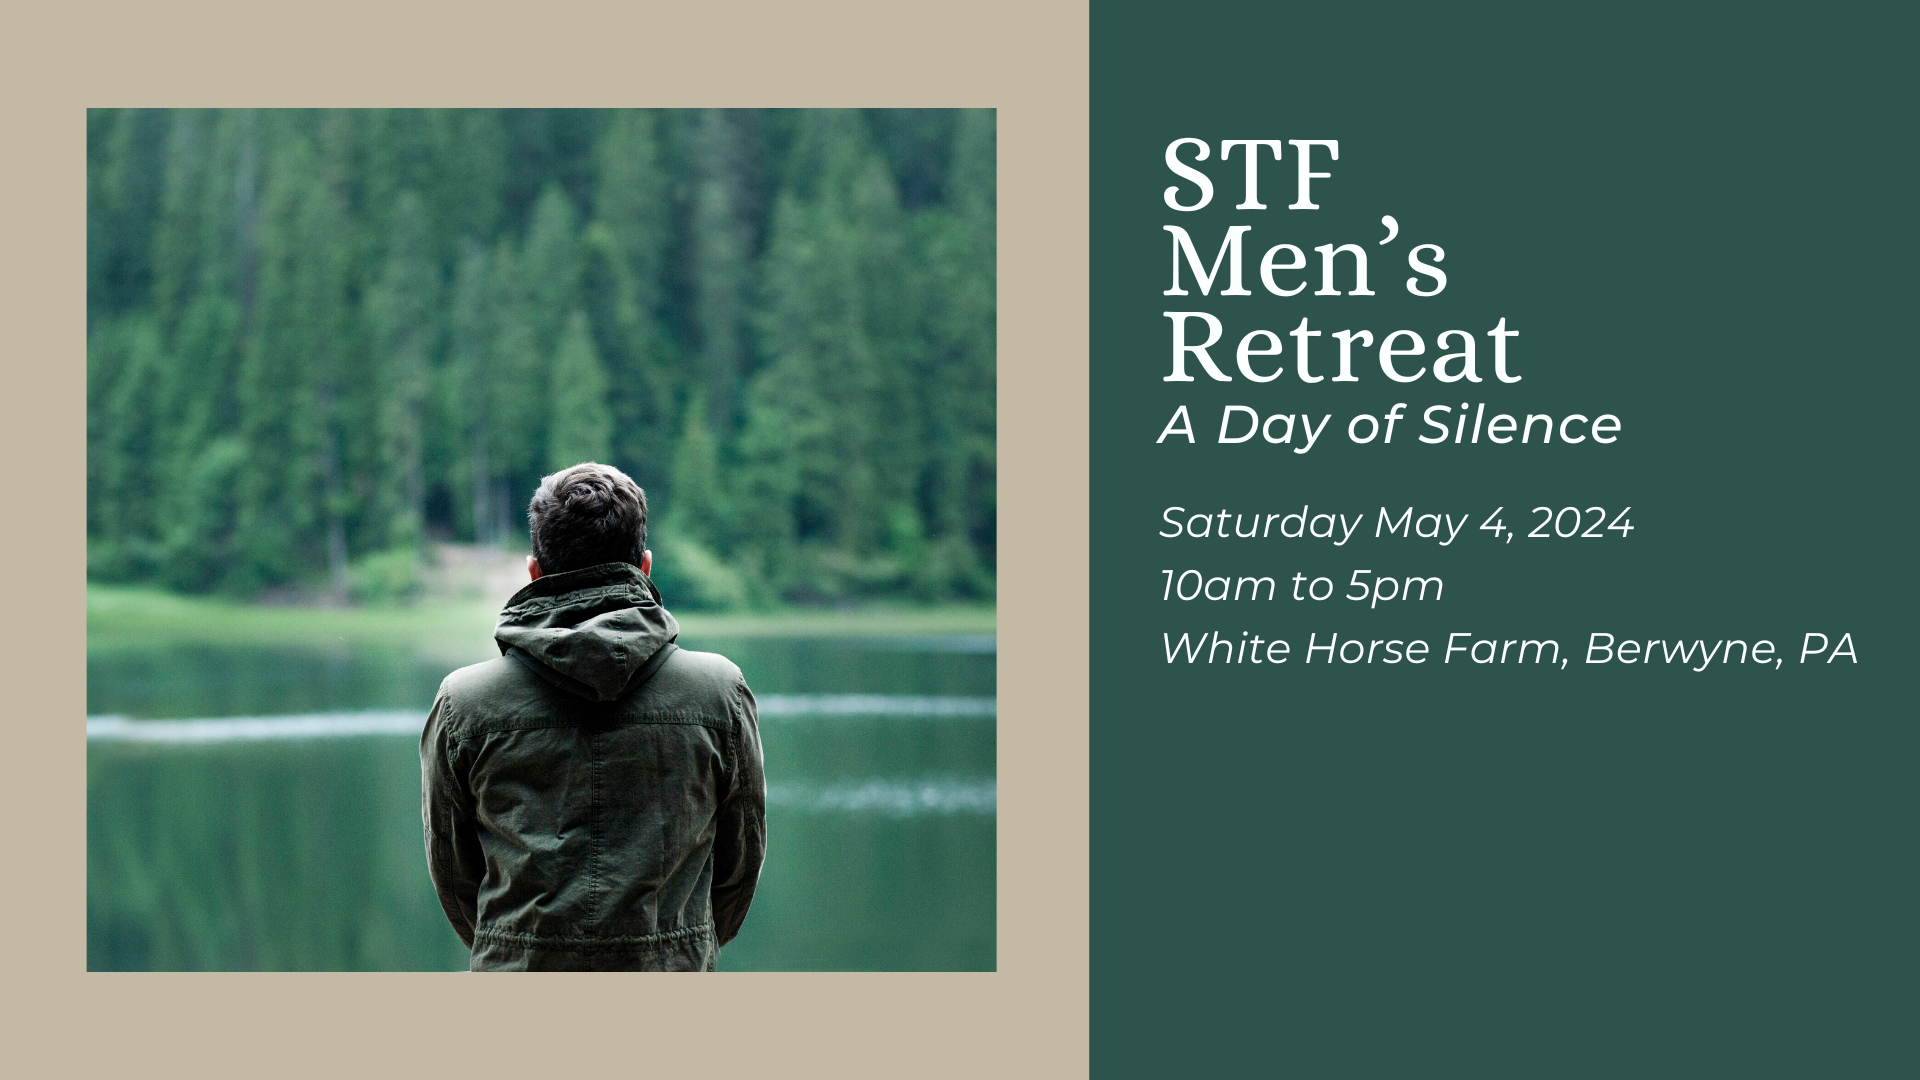 Men's Retreat - A Day of Silence